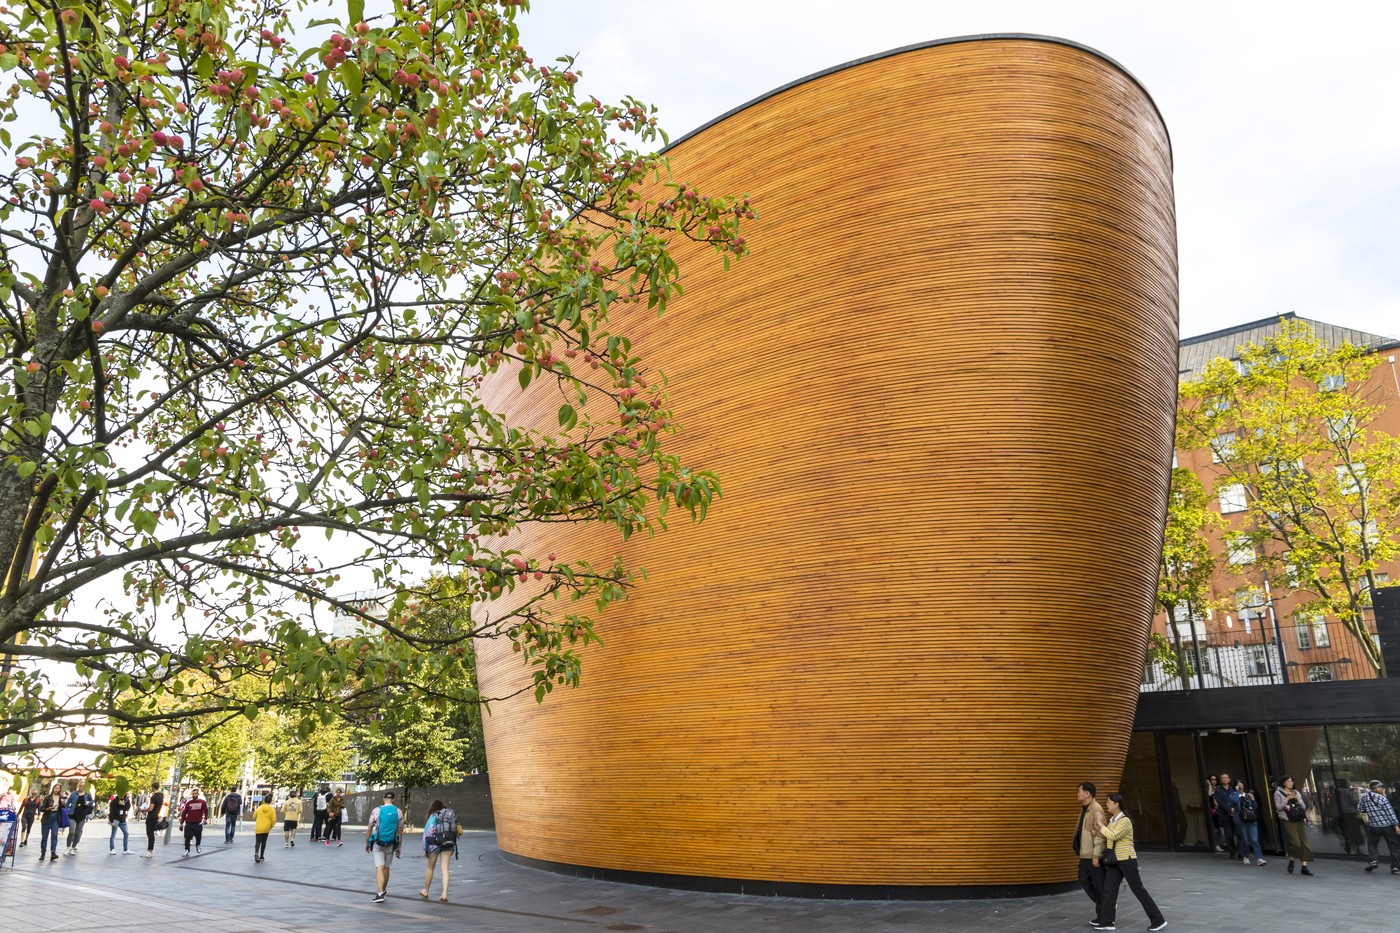 Helsinki, Finland - September 3, 2019: The Kamppi Chapel (Finnish: Kampin kappeli) is a chapel located on Narinkka Square in Kamppi district of Helsinki. Also known as the Chapel of Silence (Foto: Getty Images)